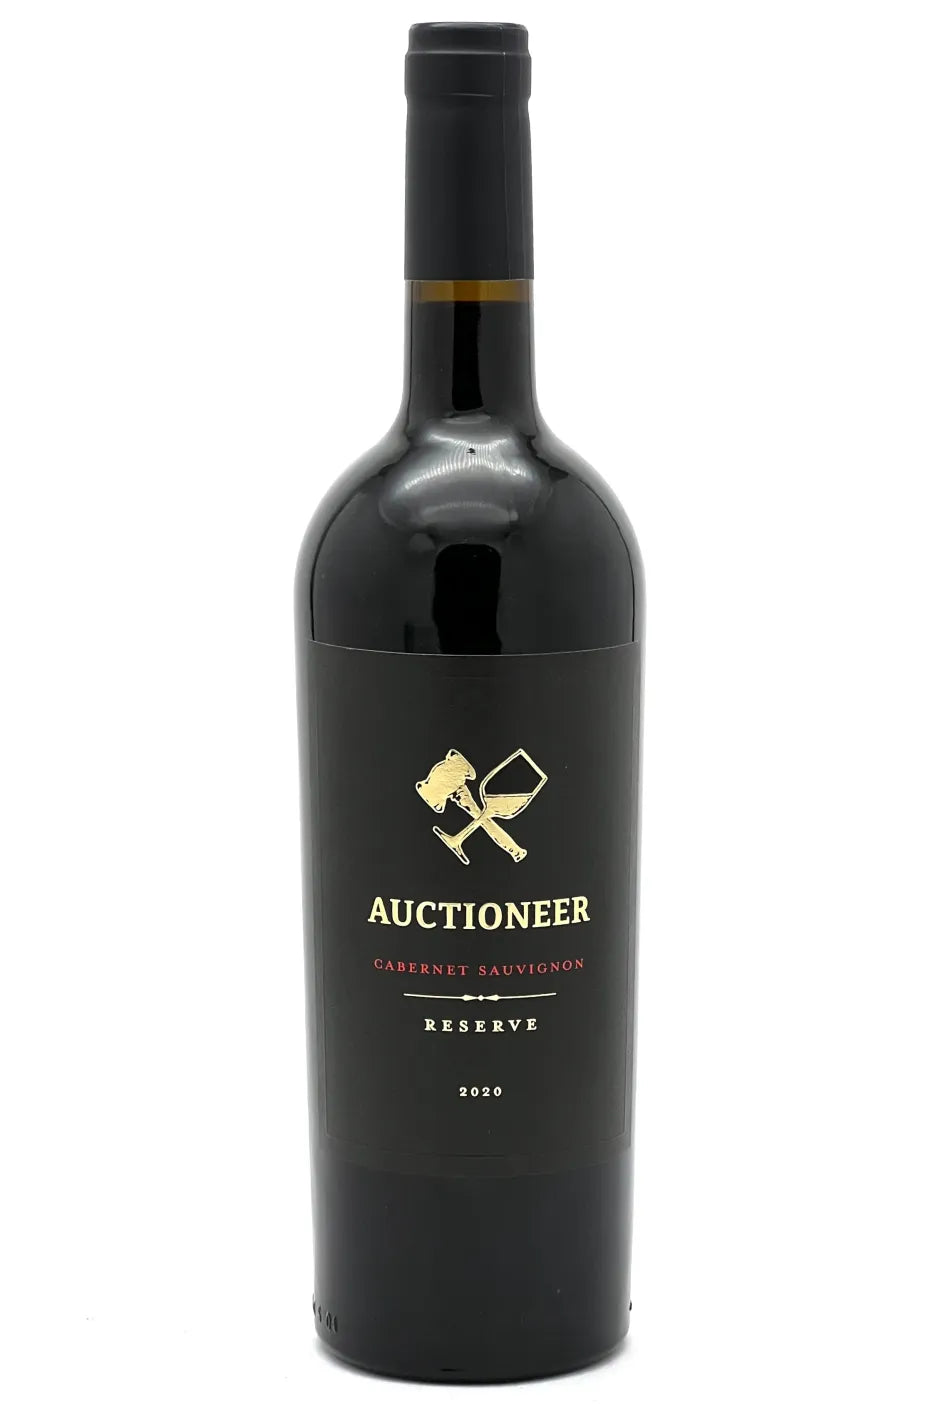 Auctioneer Cabernet Sauvignon Howell Mountain 2020